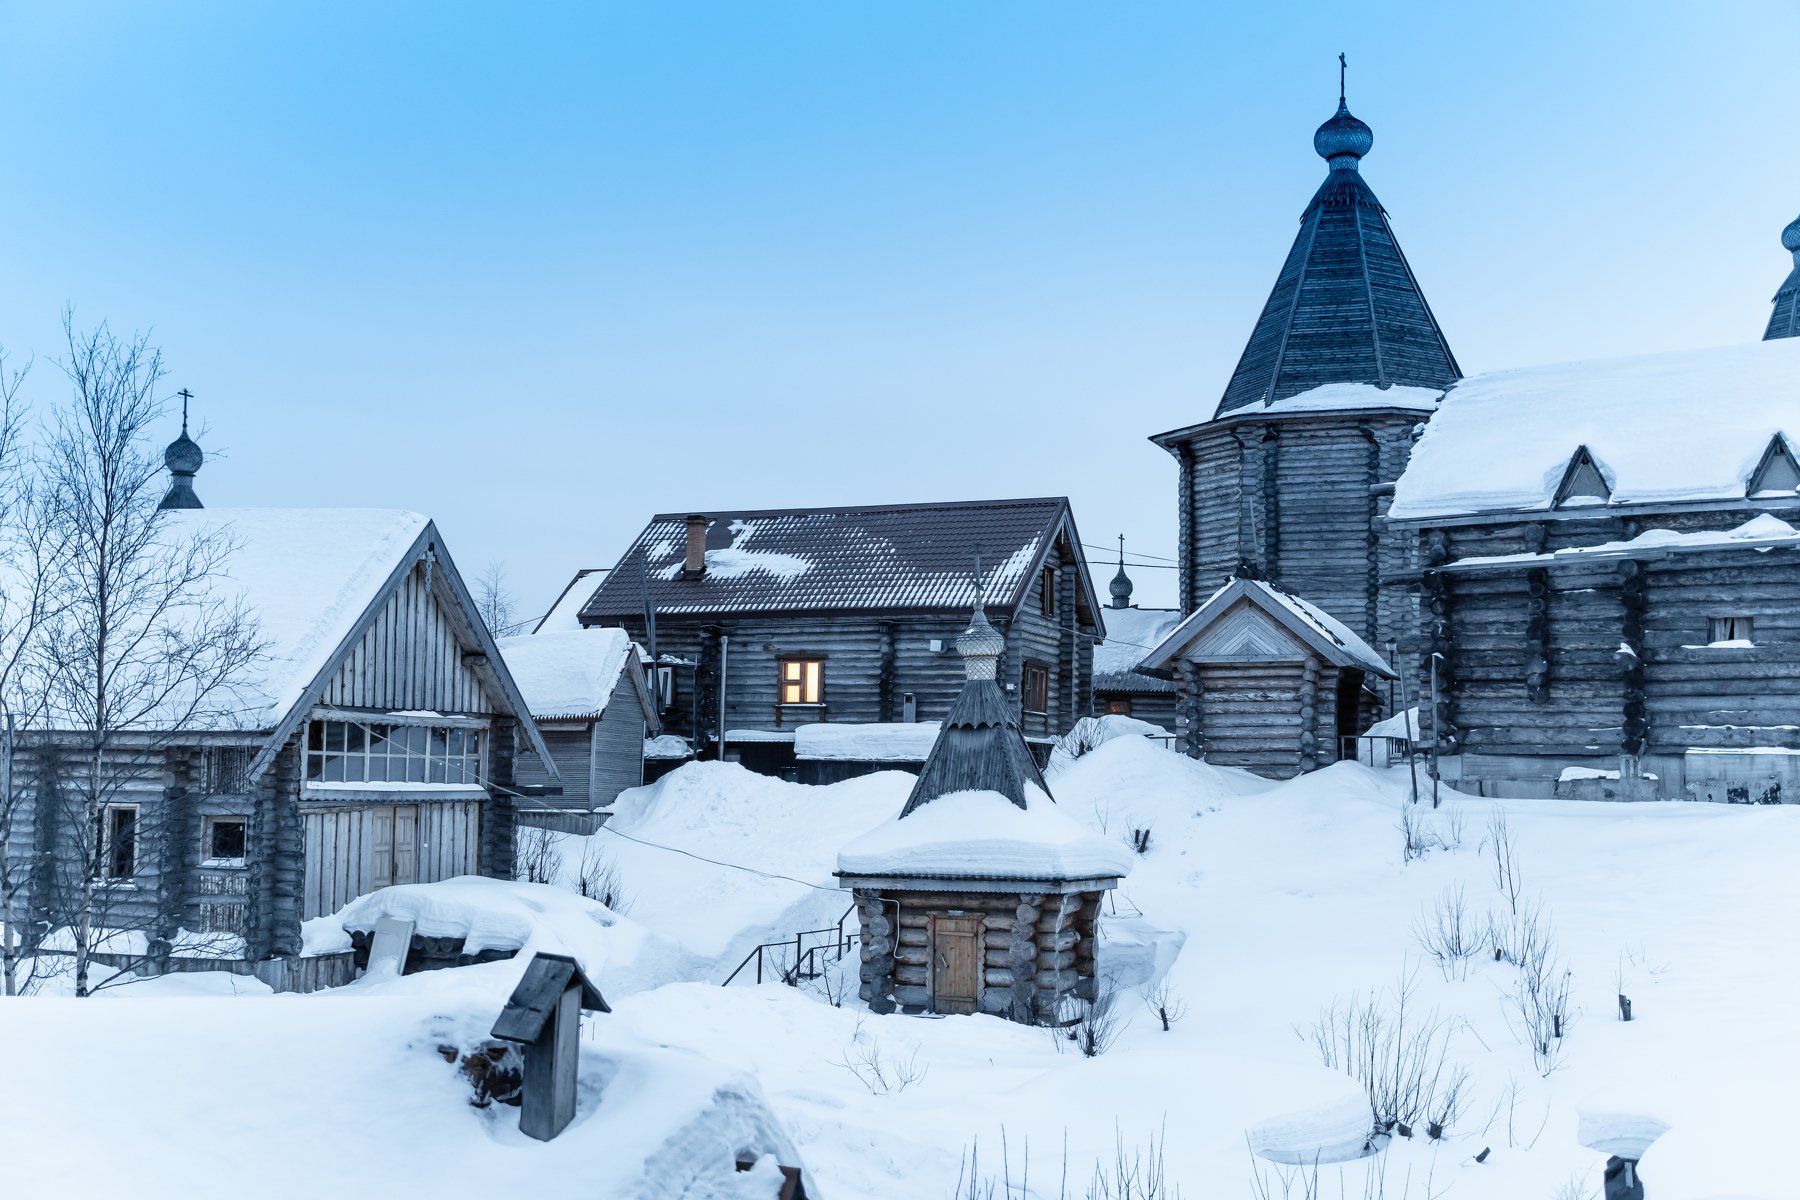 russia; house; museum; orthodoxy; saint; russian; beautiful; sightseeing; heritage; europe; christian; wooden architecture; orthodox church; monastery; unesco; historical; rural; chapel; vintage; wooden; building; landscape; religion; old; historic; summe, Dmitry Leonov